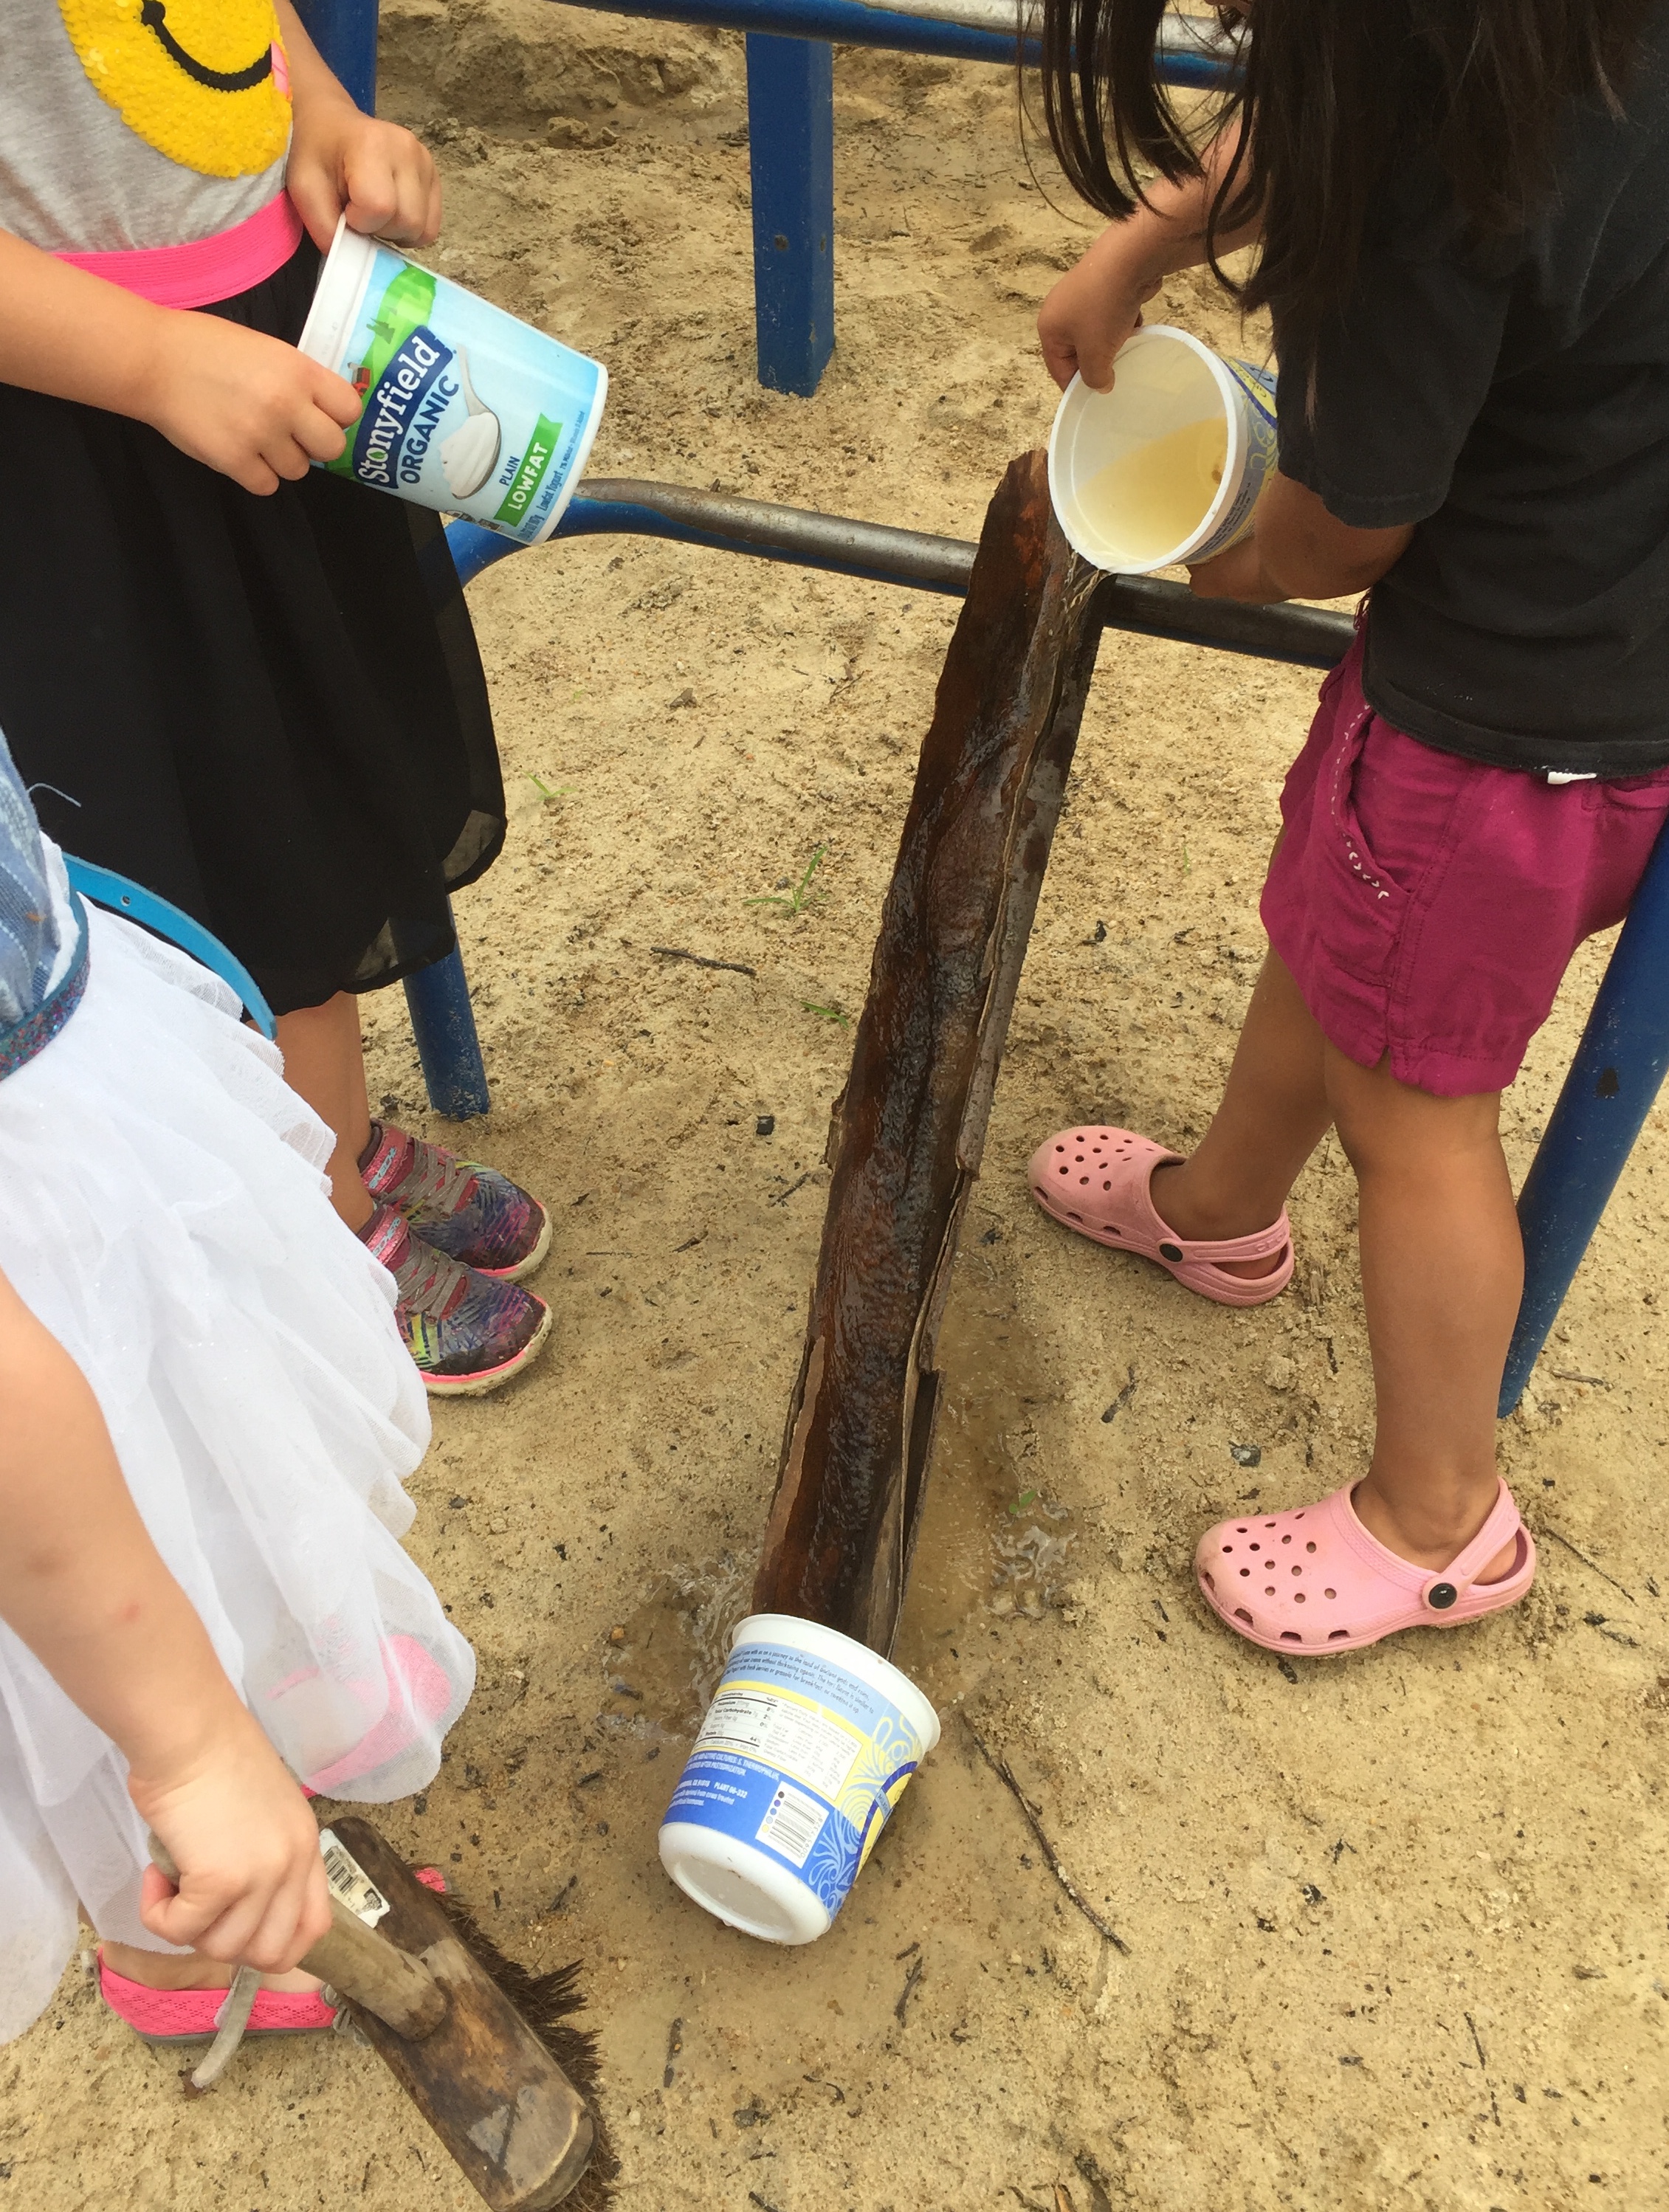 Other children join in the activity, pouring water onto the trough-like piece of tree bark.